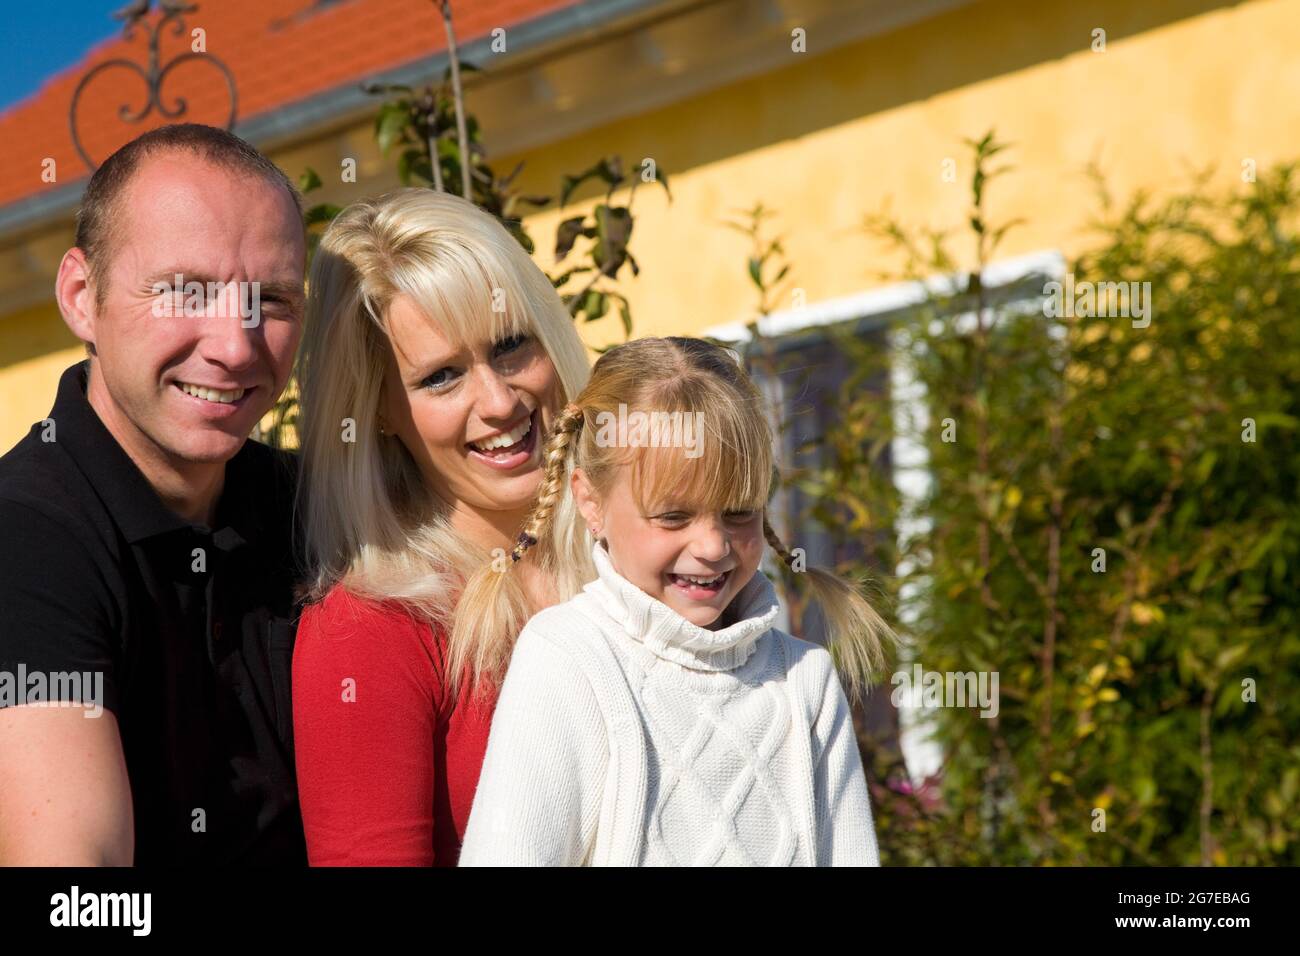 A young couple with their daughter on a perfect day sitting in front of their yellow home Stock Photo